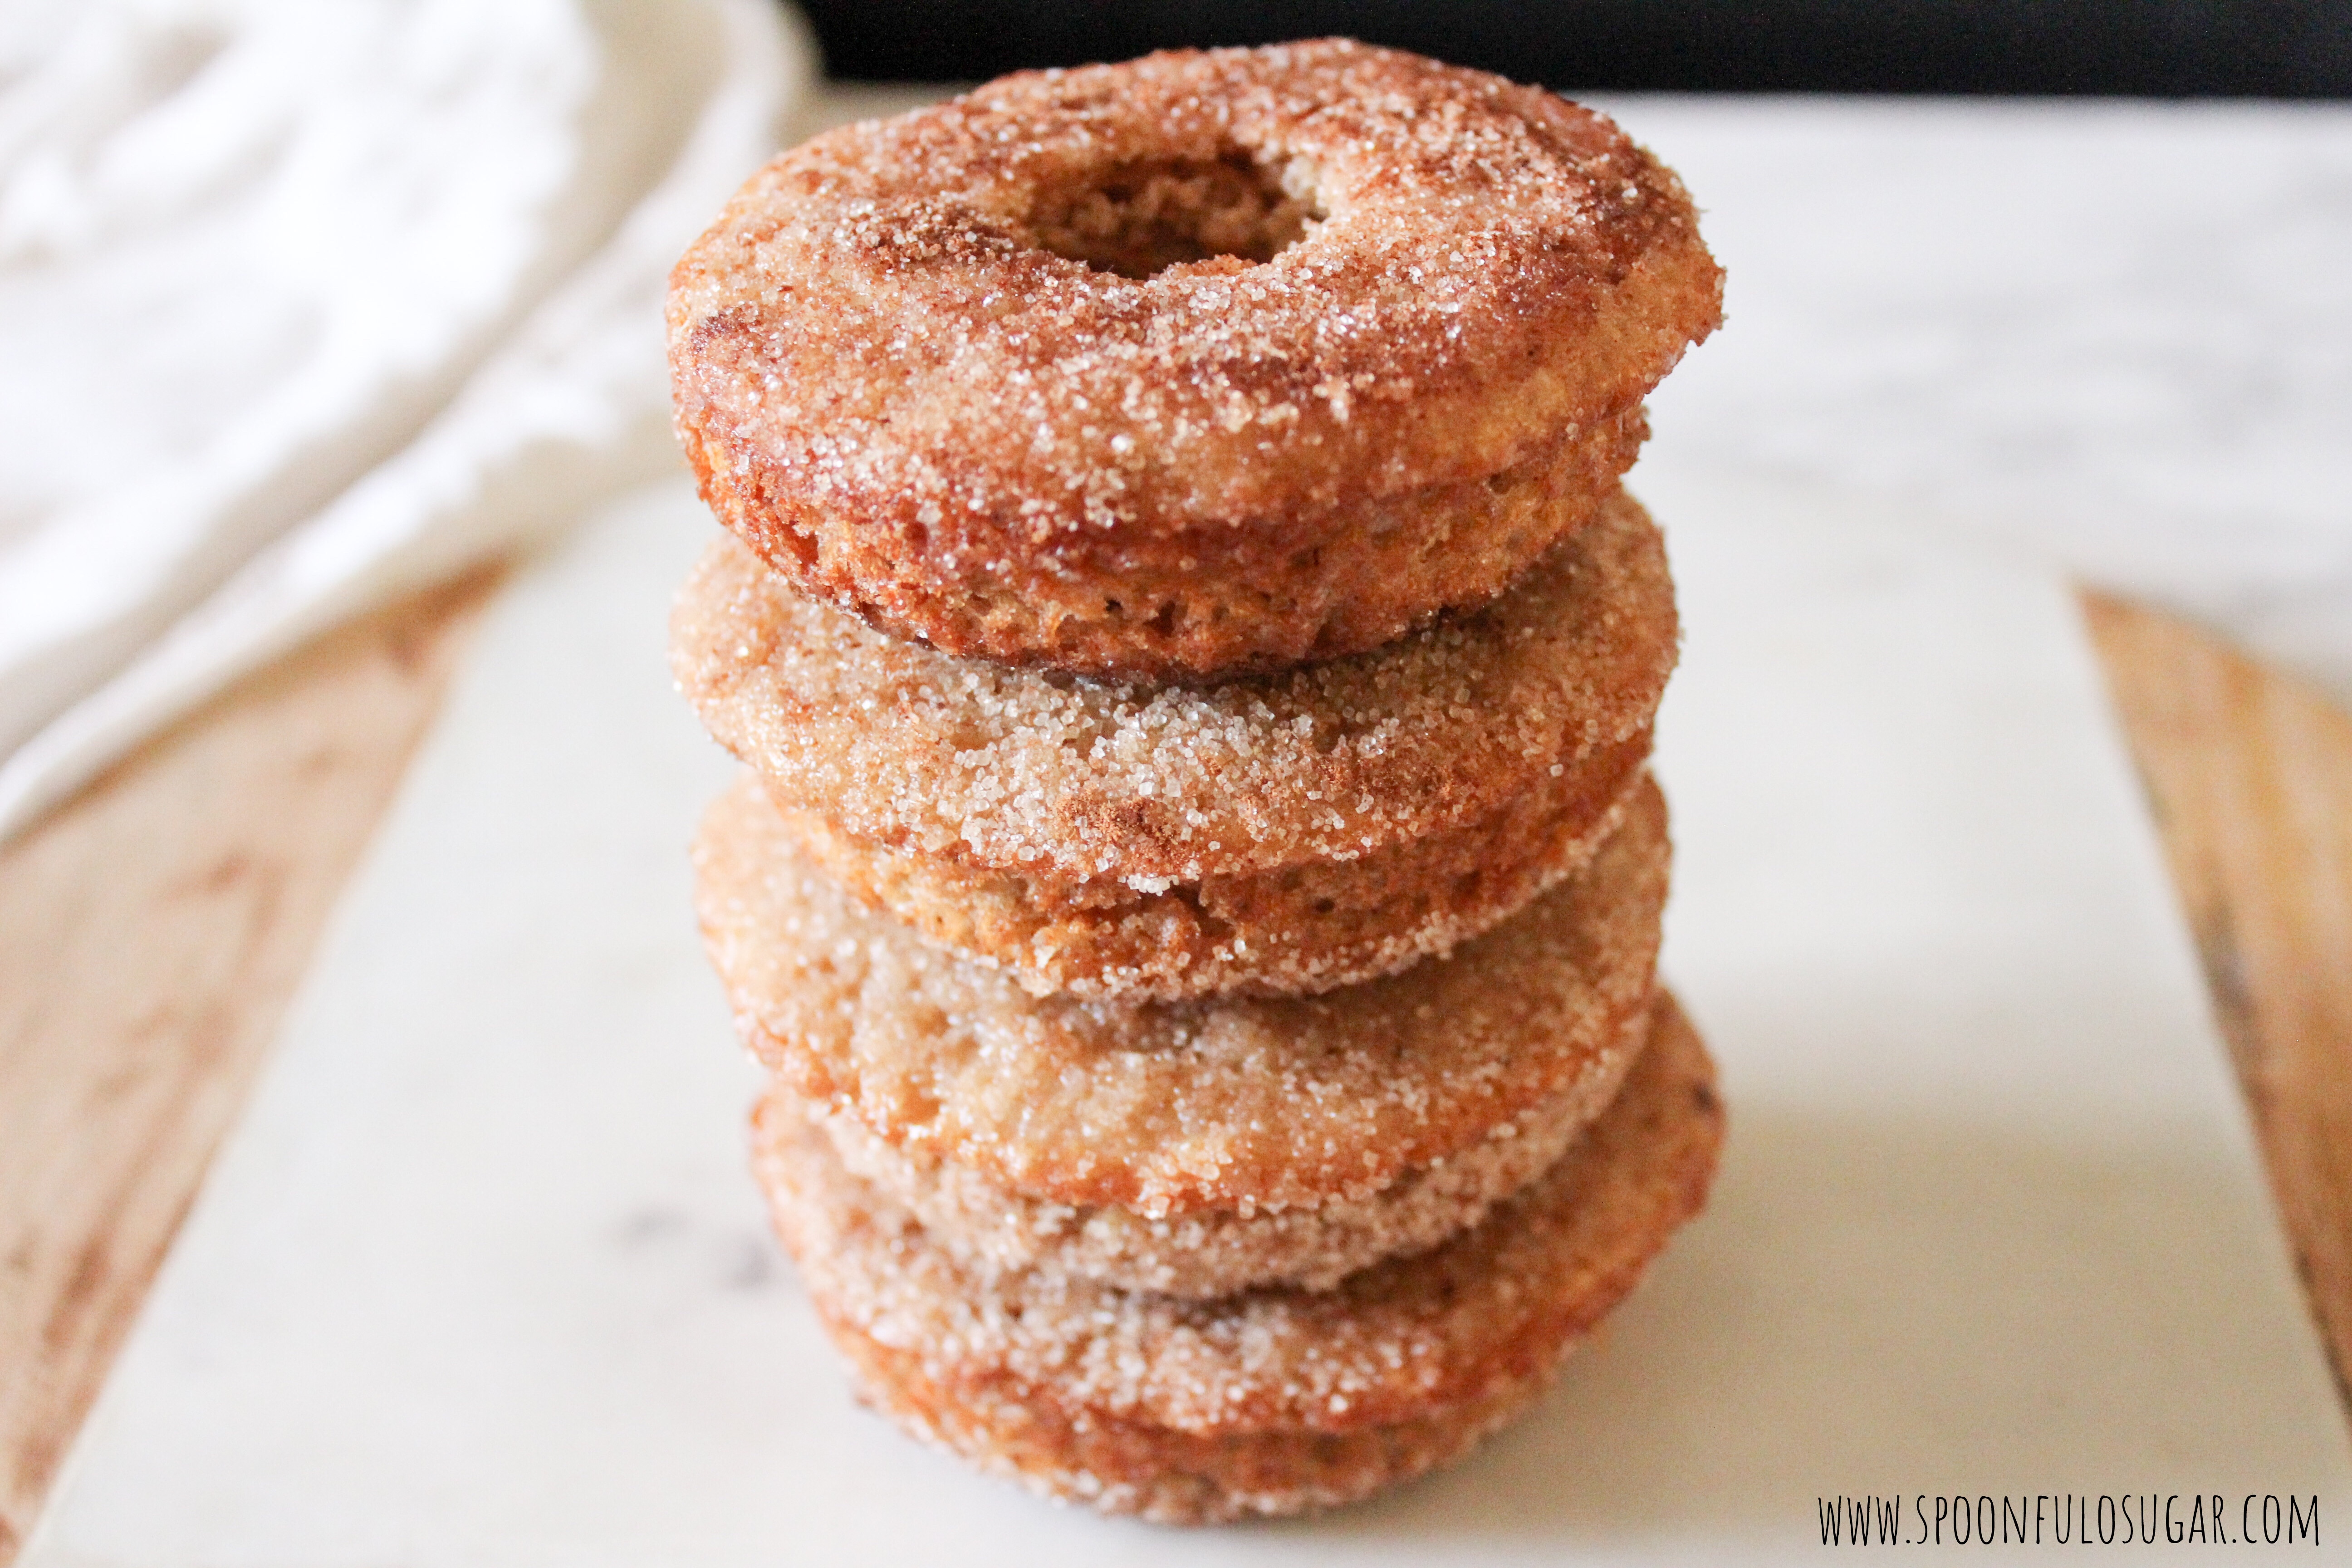 Baked Apple Cider Donuts | Spoonful of Sugar